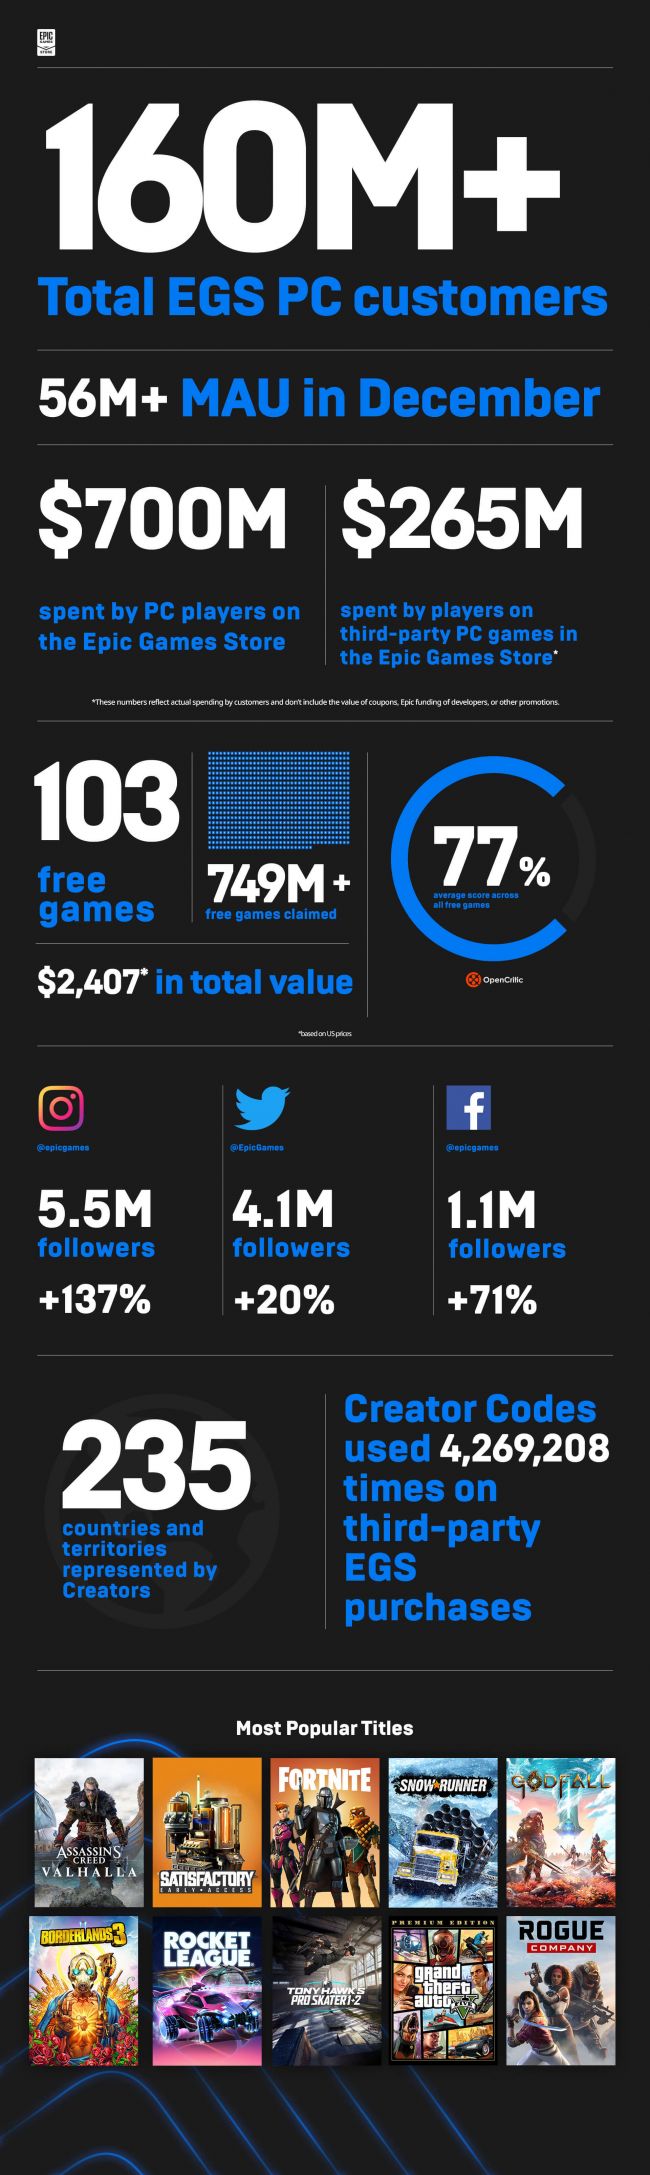 Epic Games Store now has over 160 million users